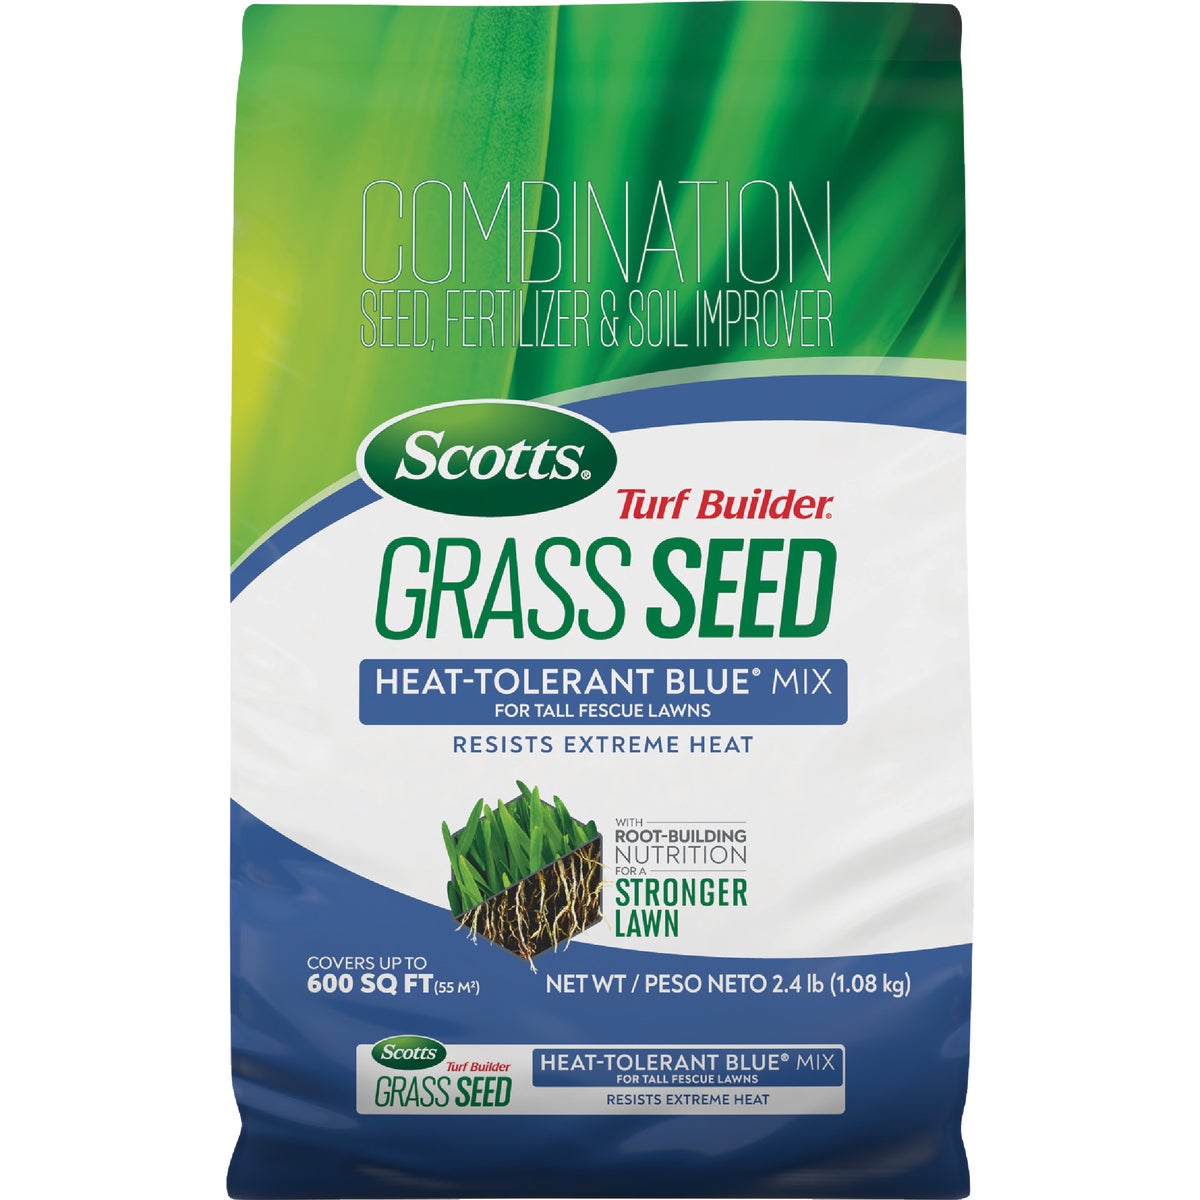 Scotts Turf Builder 5.6 Lb. 465 Sq. Ft. Heat-Tolerant Blue Mix for Tall Fescue Lawns Grass Seed